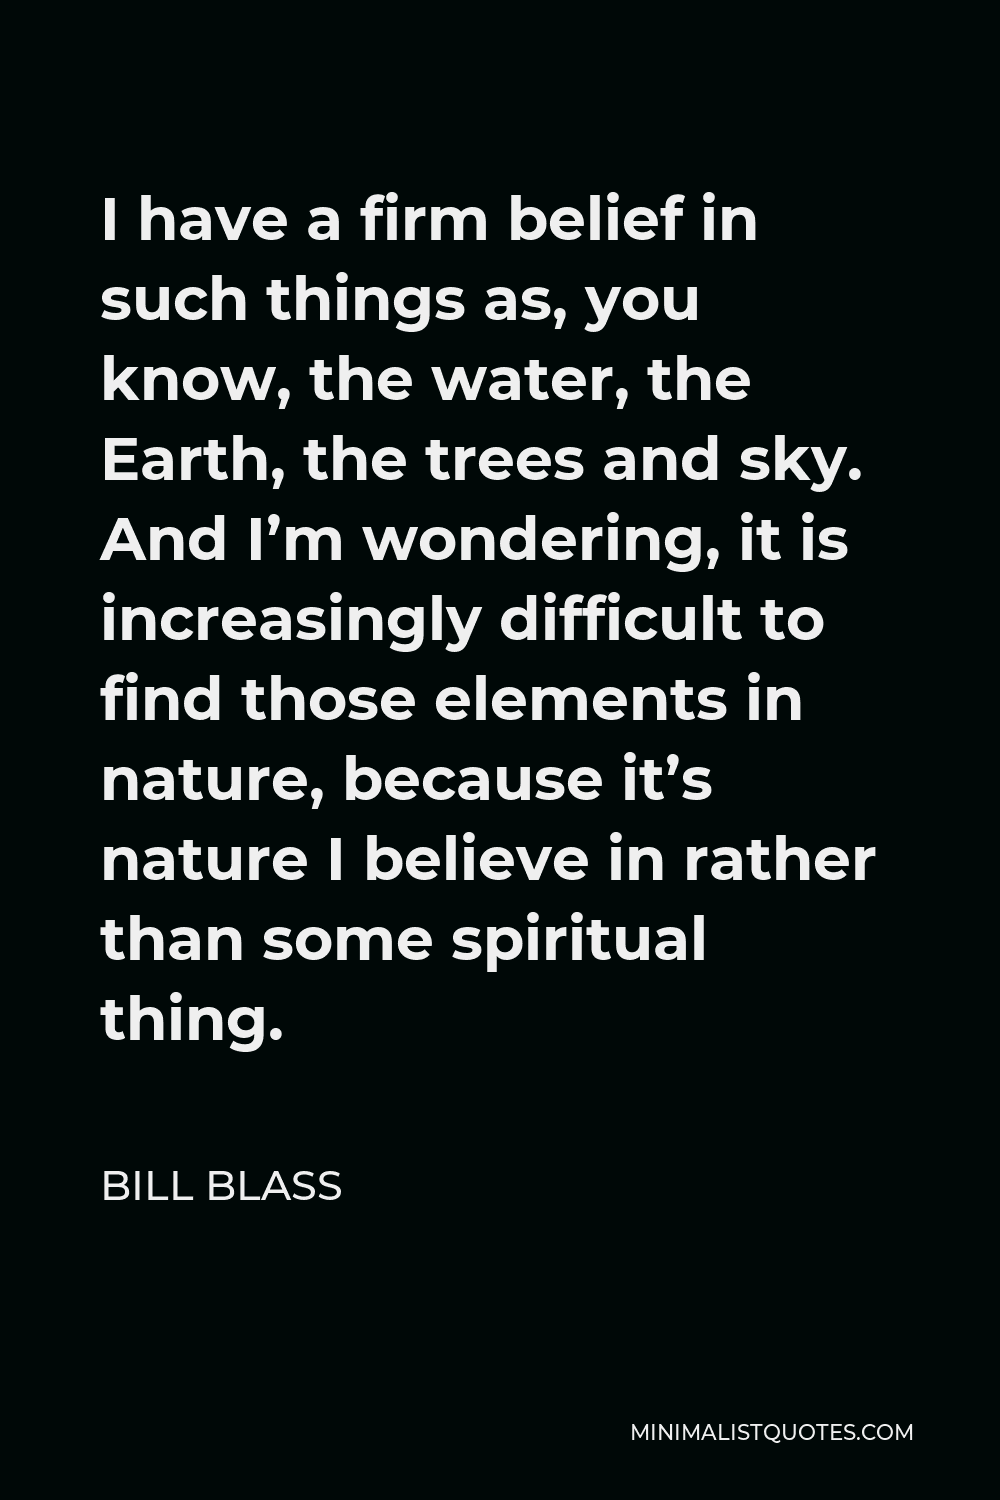 Bill Blass Quote - I have a firm belief in such things as, you know, the water, the Earth, the trees and sky. And I’m wondering, it is increasingly difficult to find those elements in nature, because it’s nature I believe in rather than some spiritual thing.